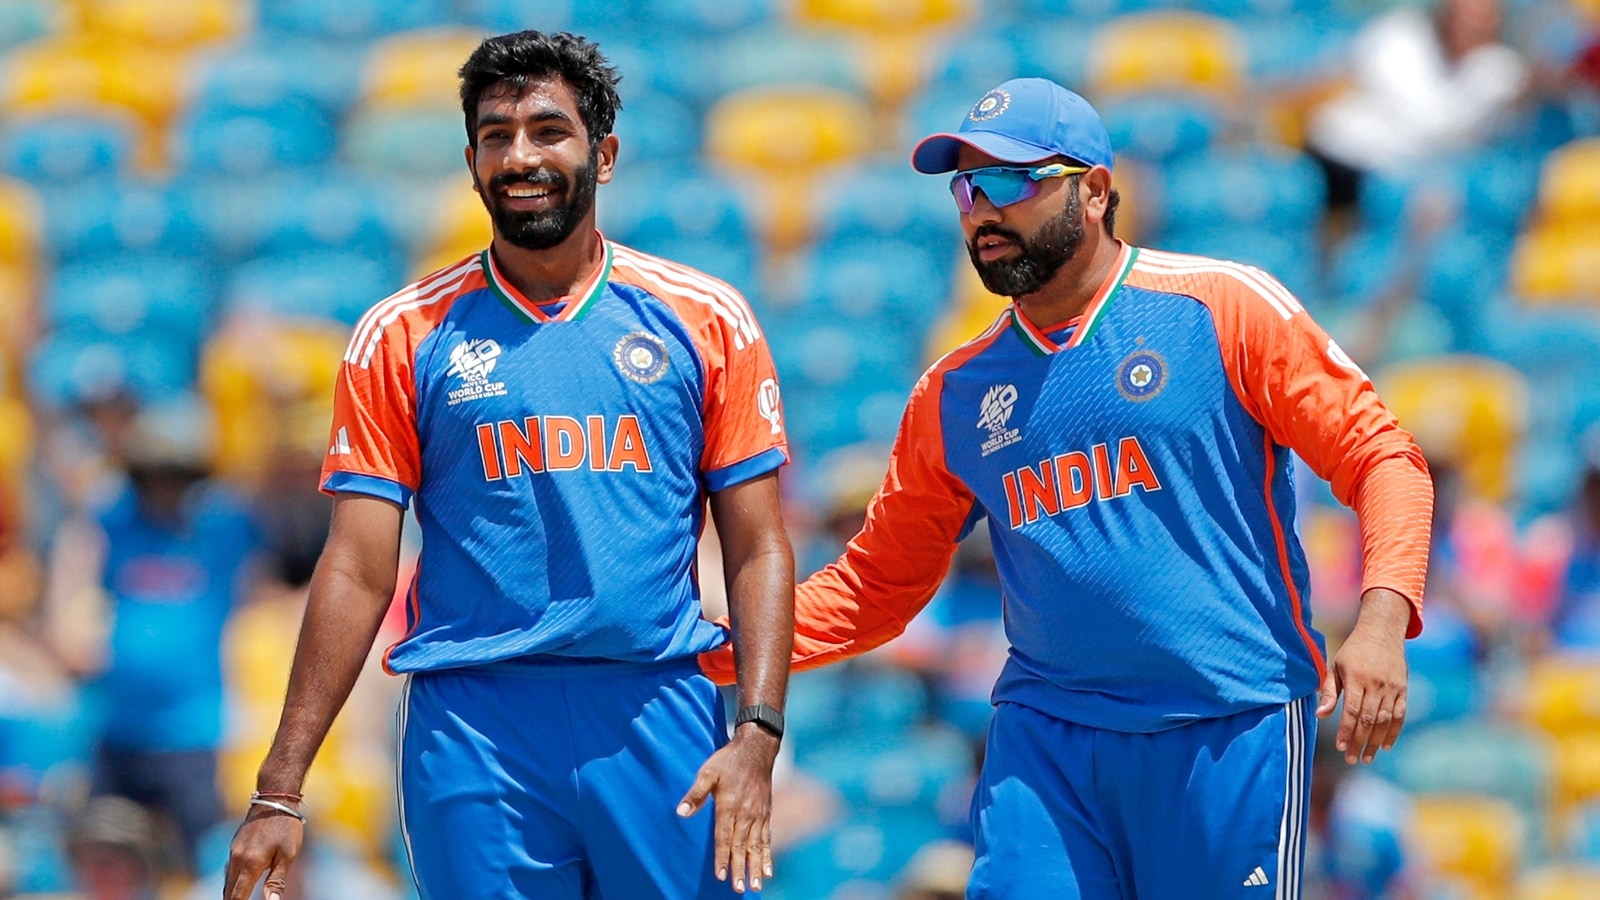 Jasprit Bumrah picks himself as ‘greatest Indian captain’, ignores Dhoni, Rohit, Kohli: ‘There are great captains but…’